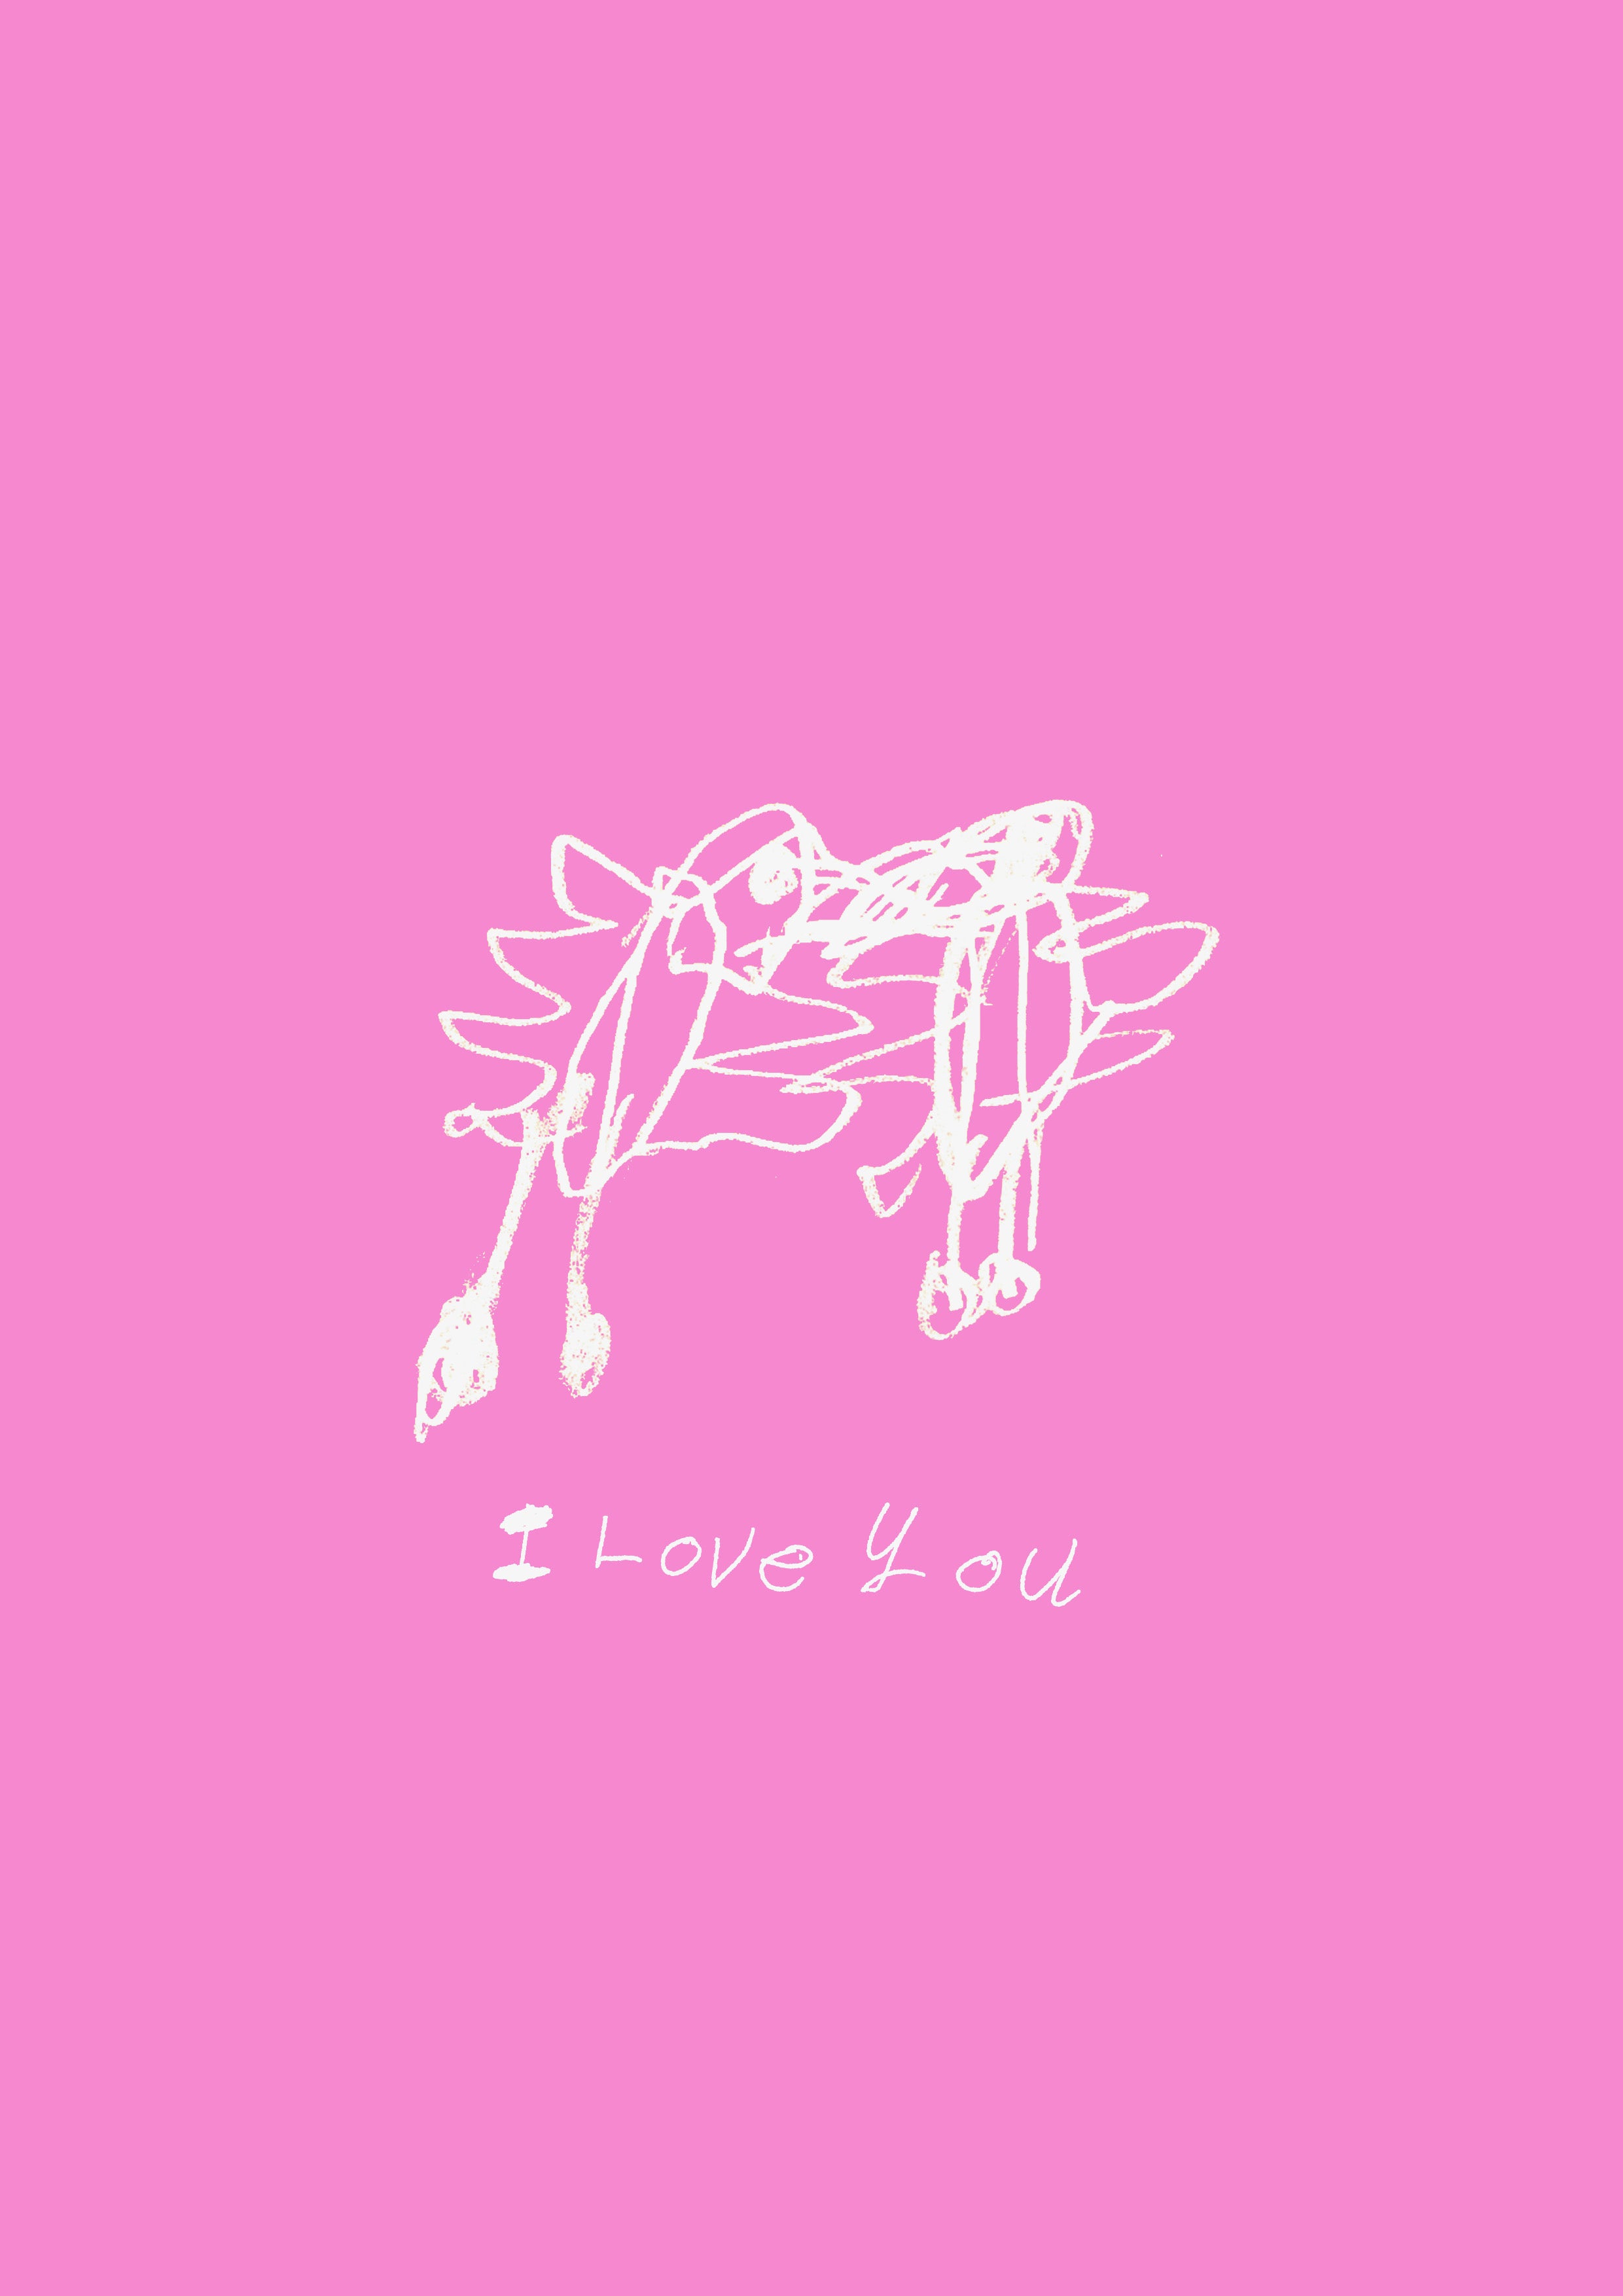 'I Love You' by Notes by Piper